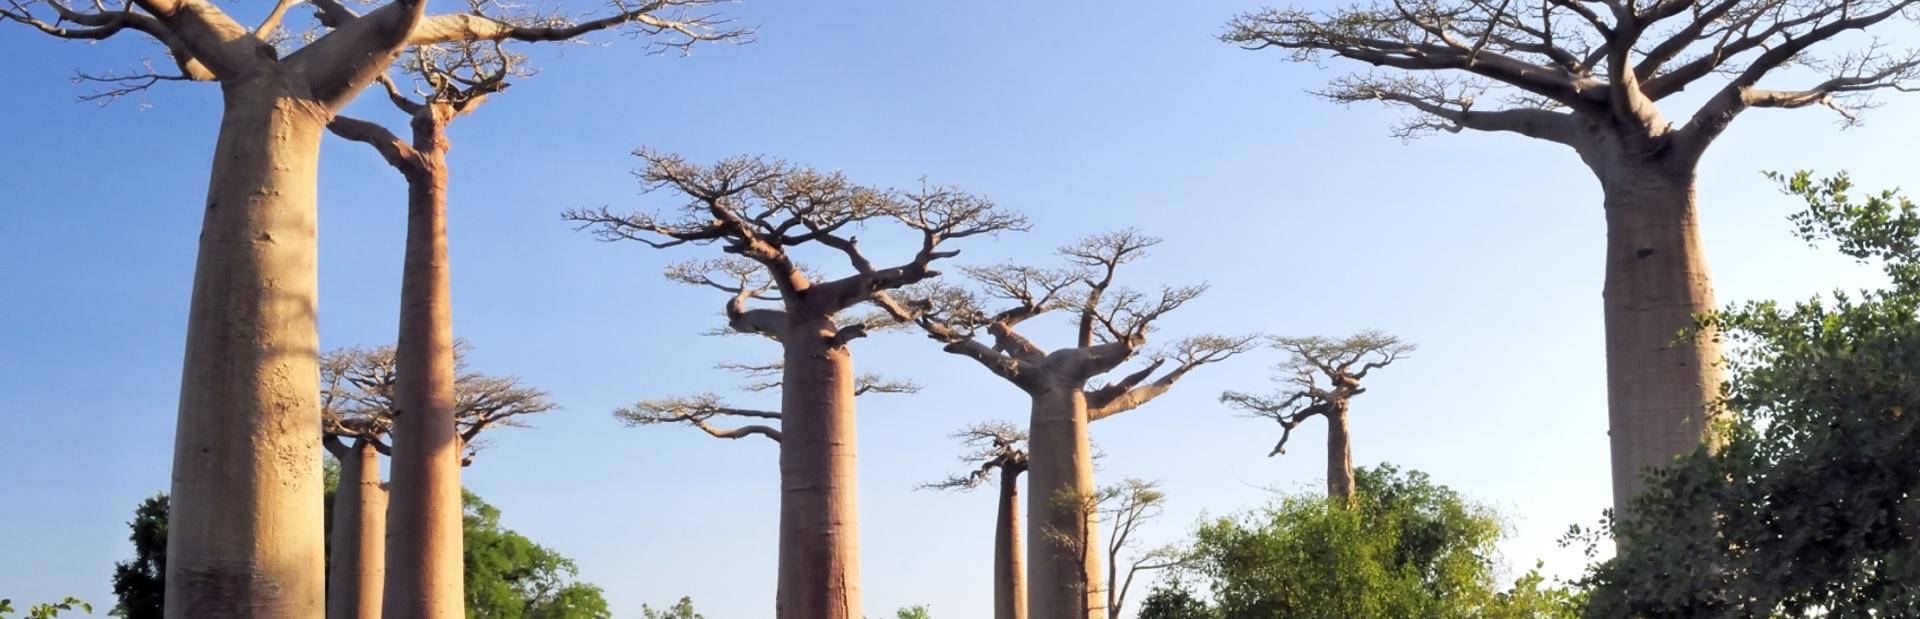 The Avenue or Alley of the Baobabs